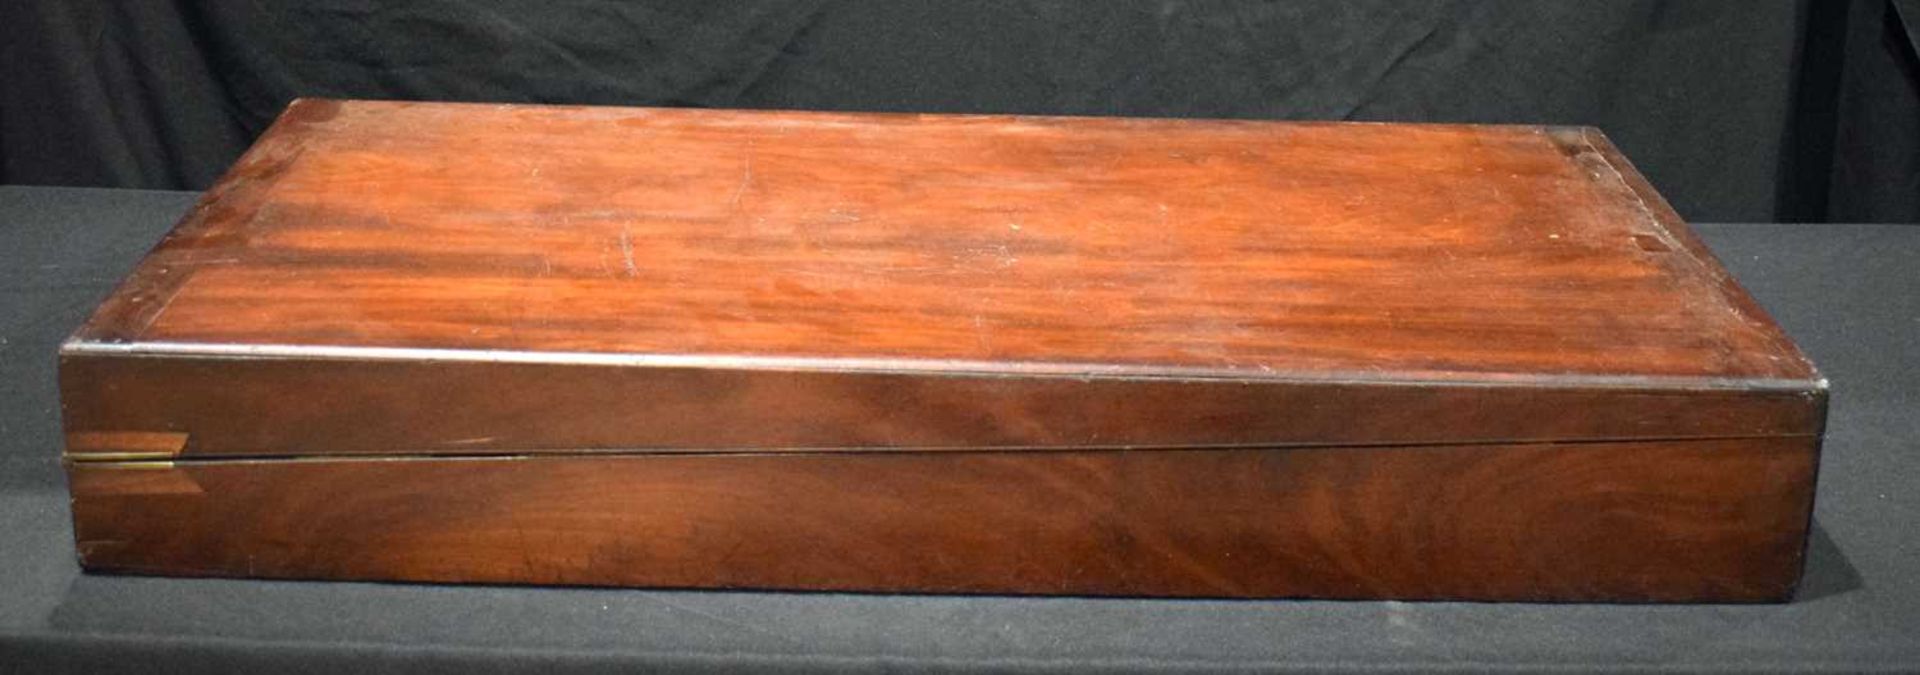 A large Mahogany folding Bagatelle game with Treen numbered inserts 15 x 53 x 212 cm. - Image 7 of 7